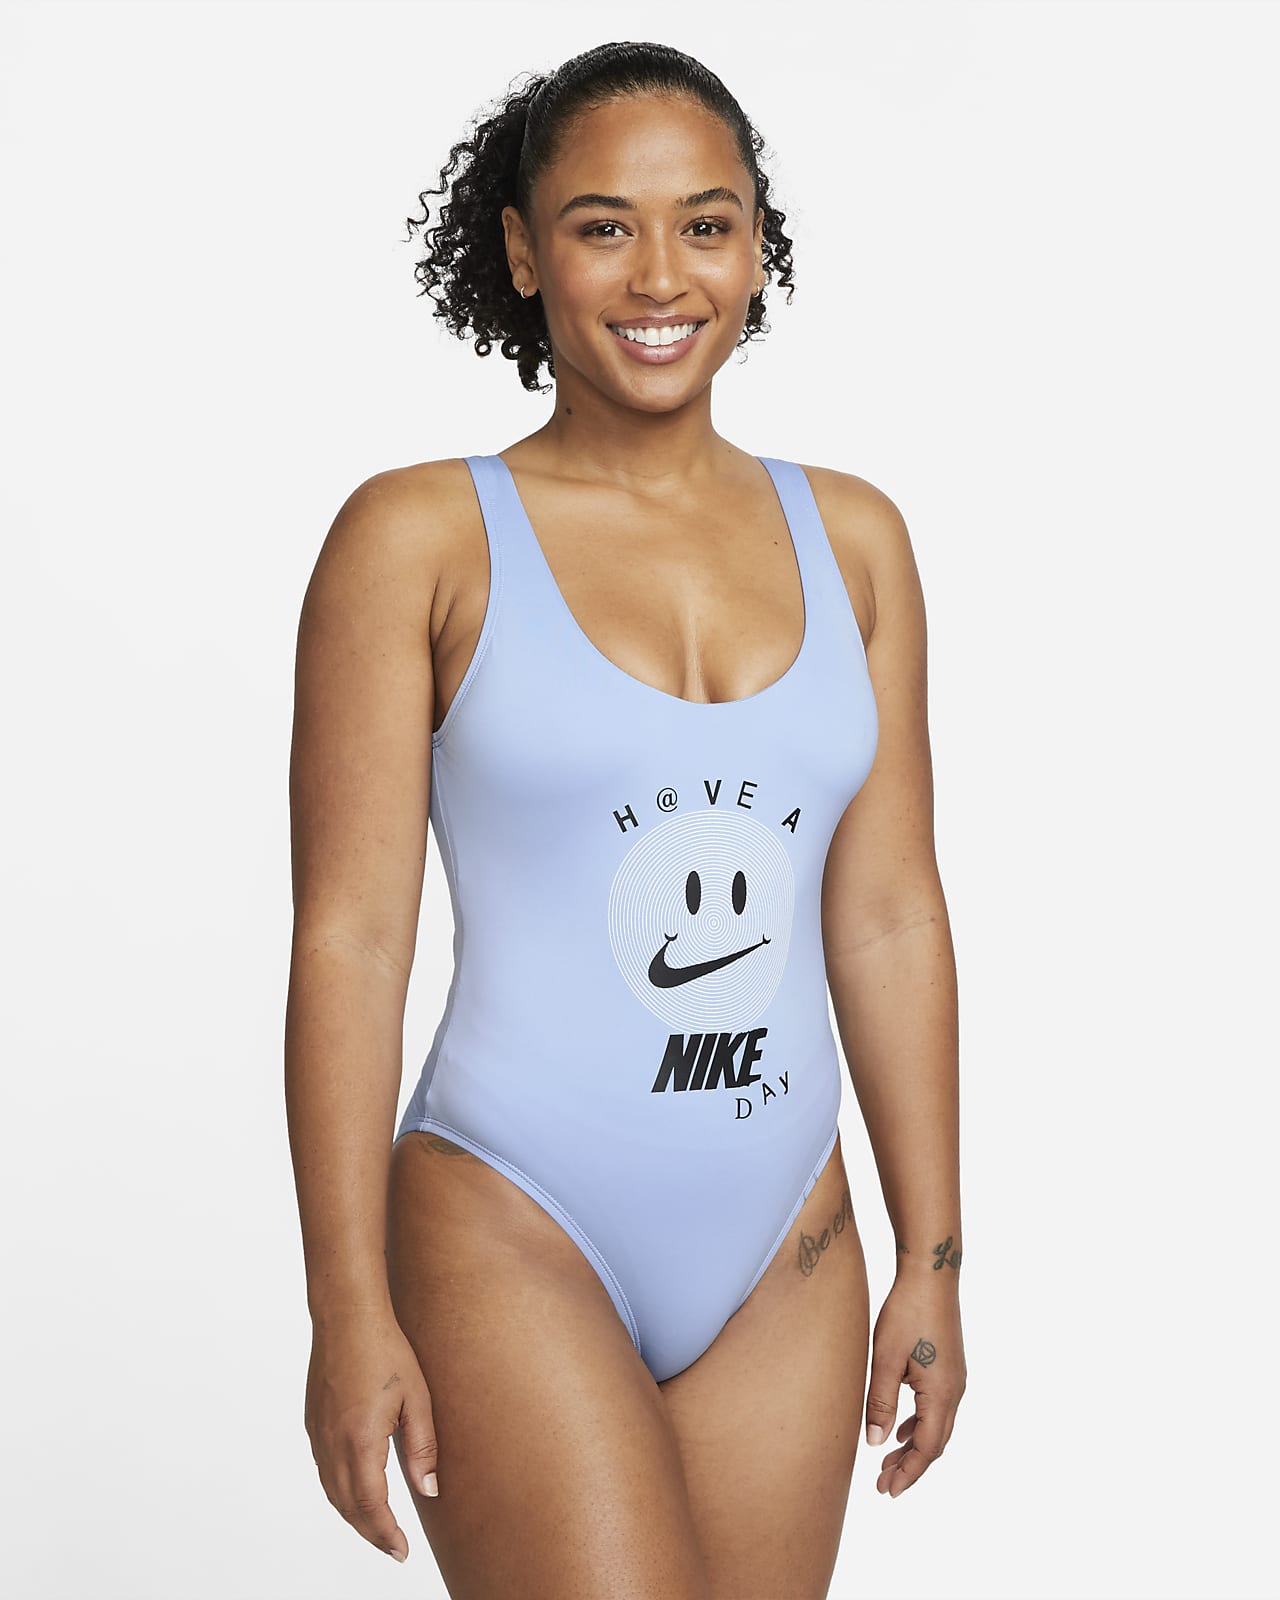  Swimsuits For Women